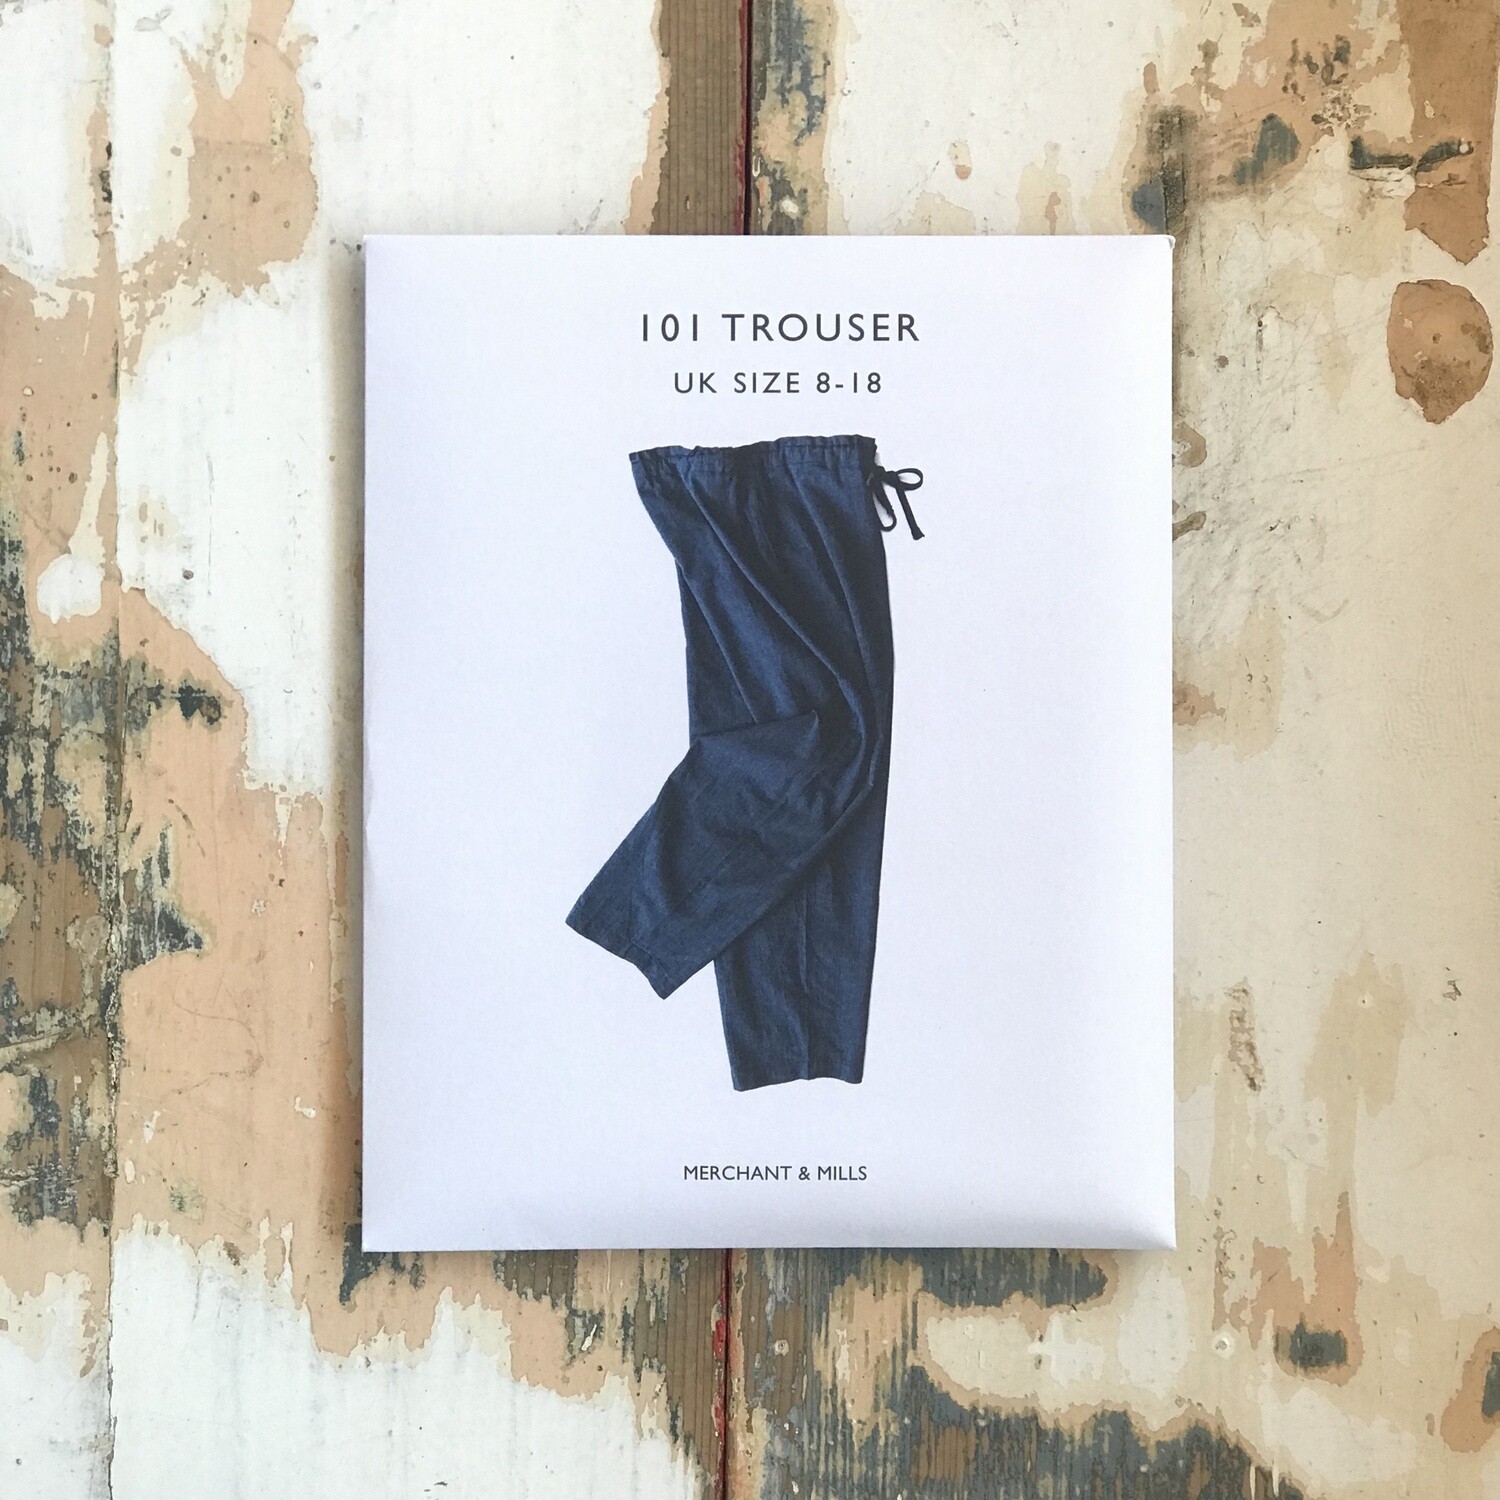 The 101 Trouser